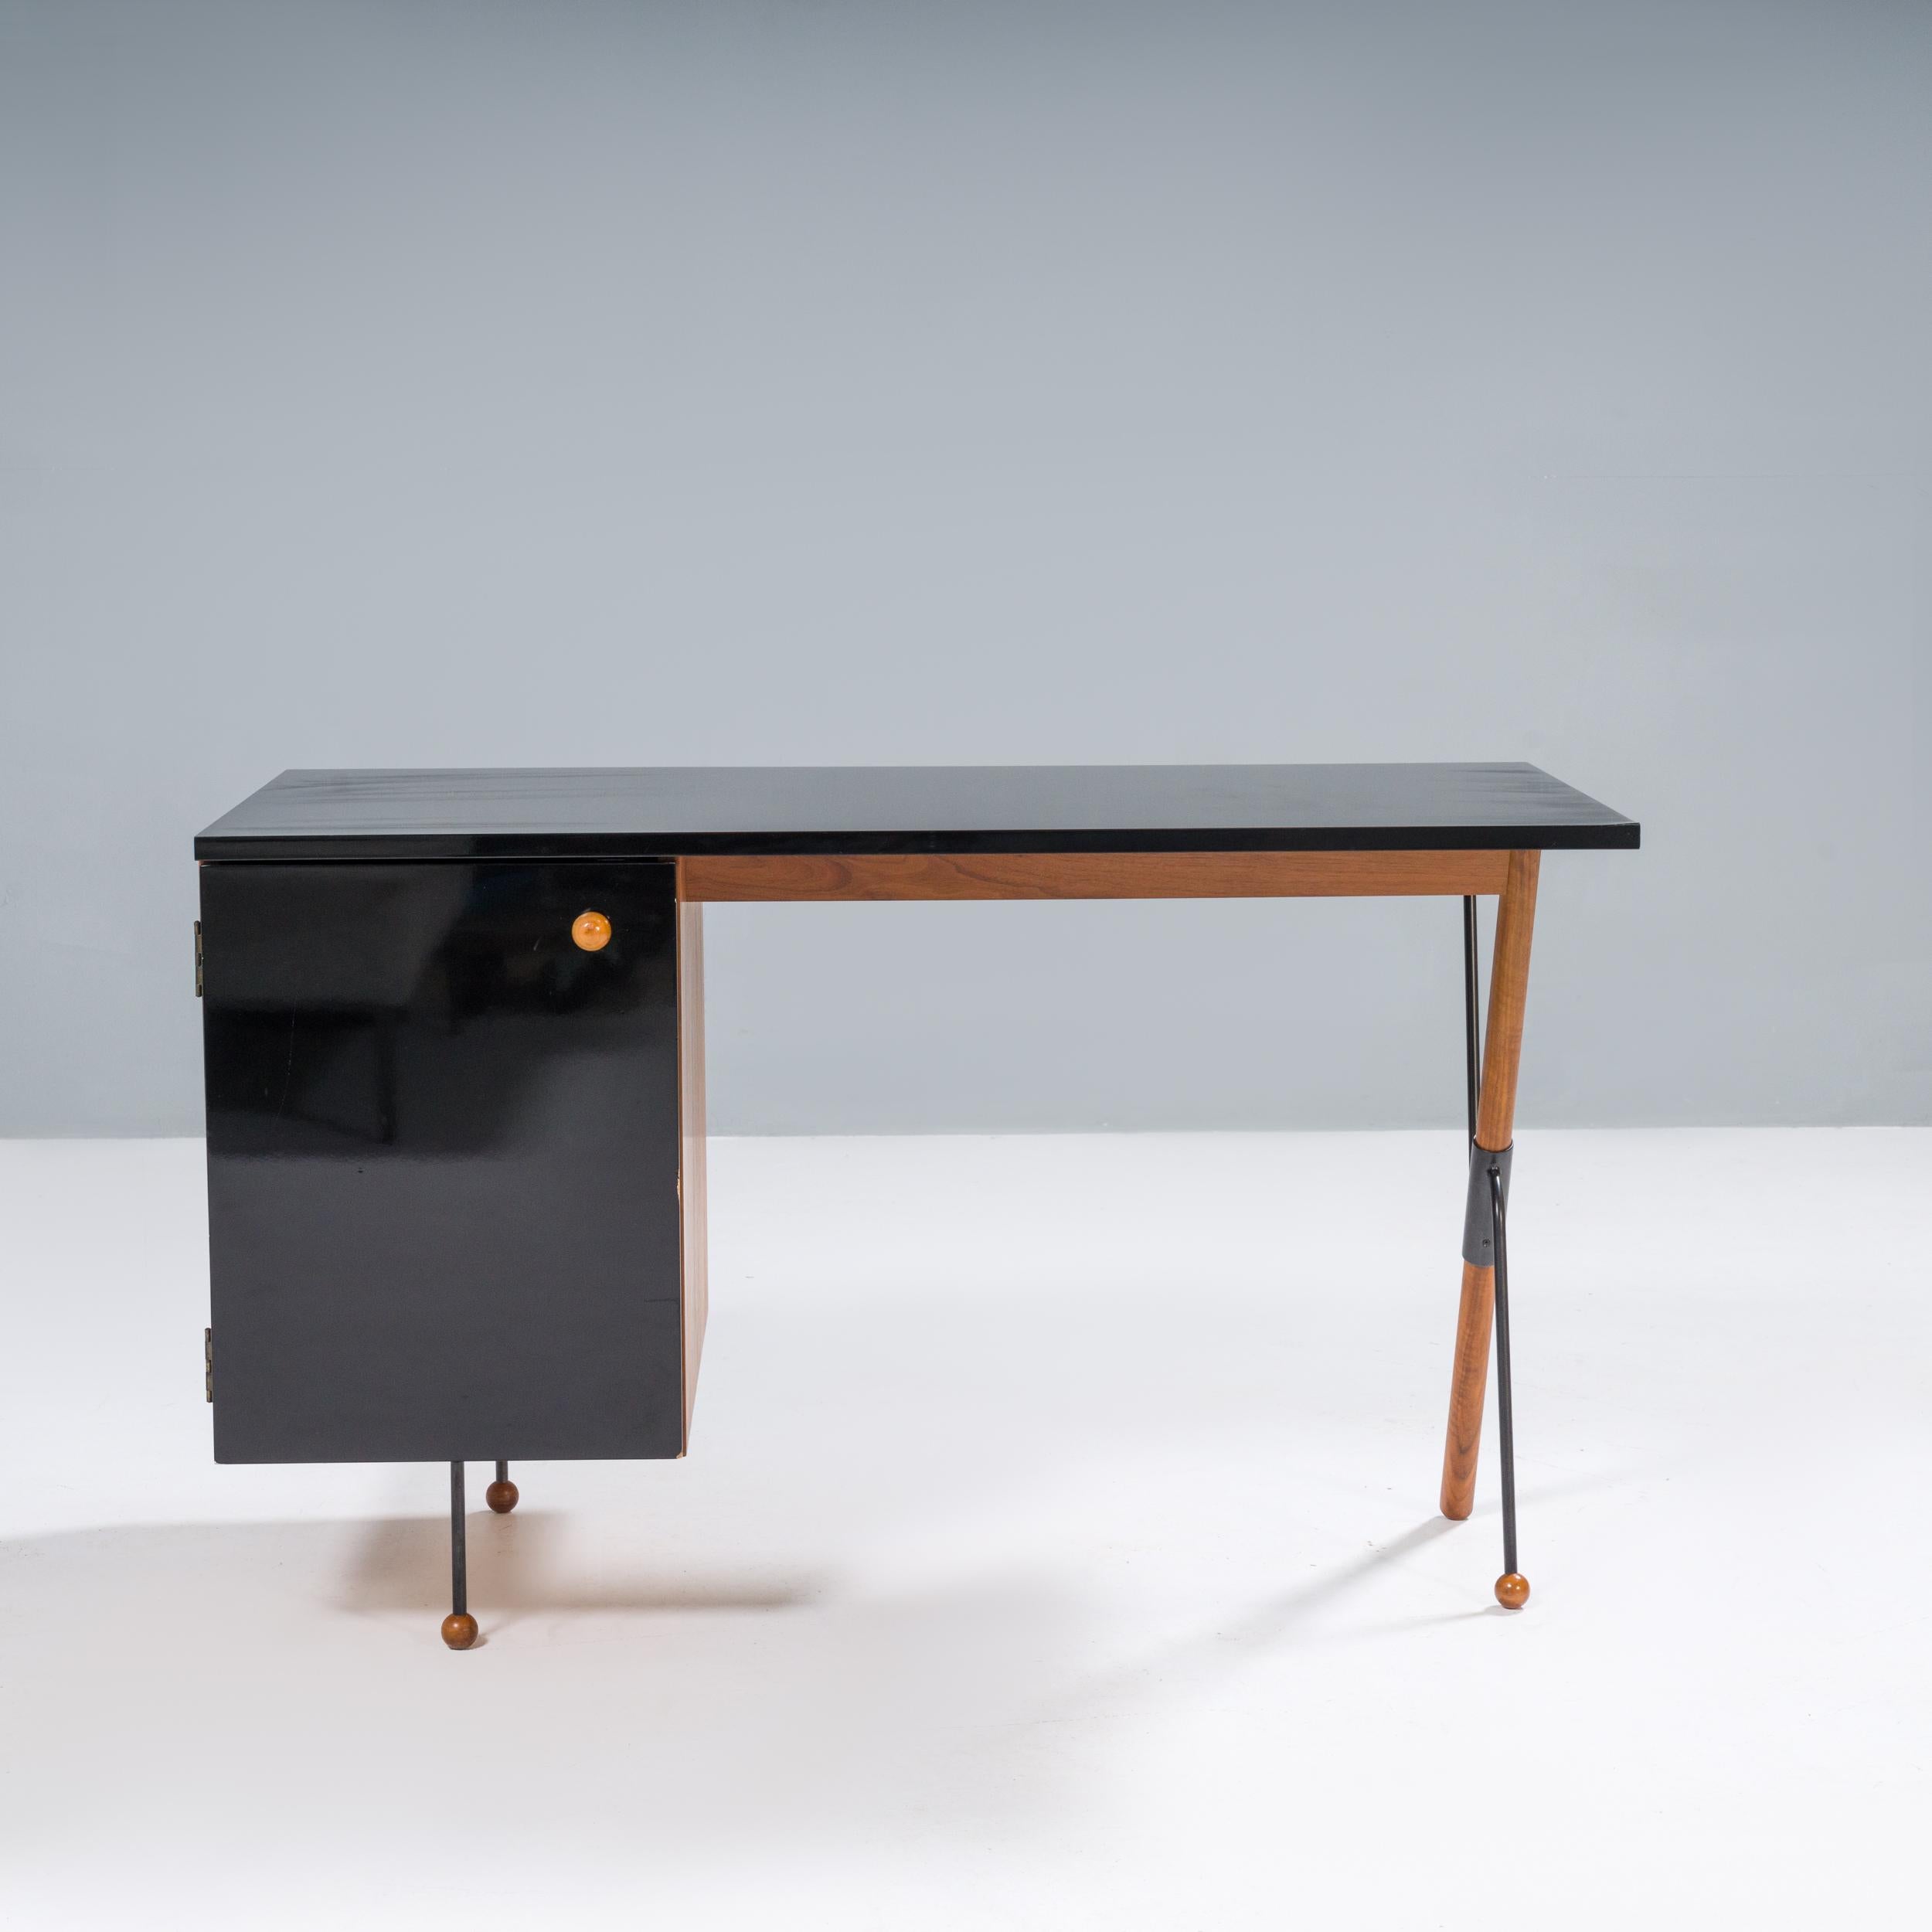 Originally designed by Greta M. Grossman in 1952, the desk was named the 62 for being a decade ahead of its time in its design aesthetic.

Now an iconic piece of mid-century furniture, the 62 Desk is a-symmetric in style and perfectly balances the